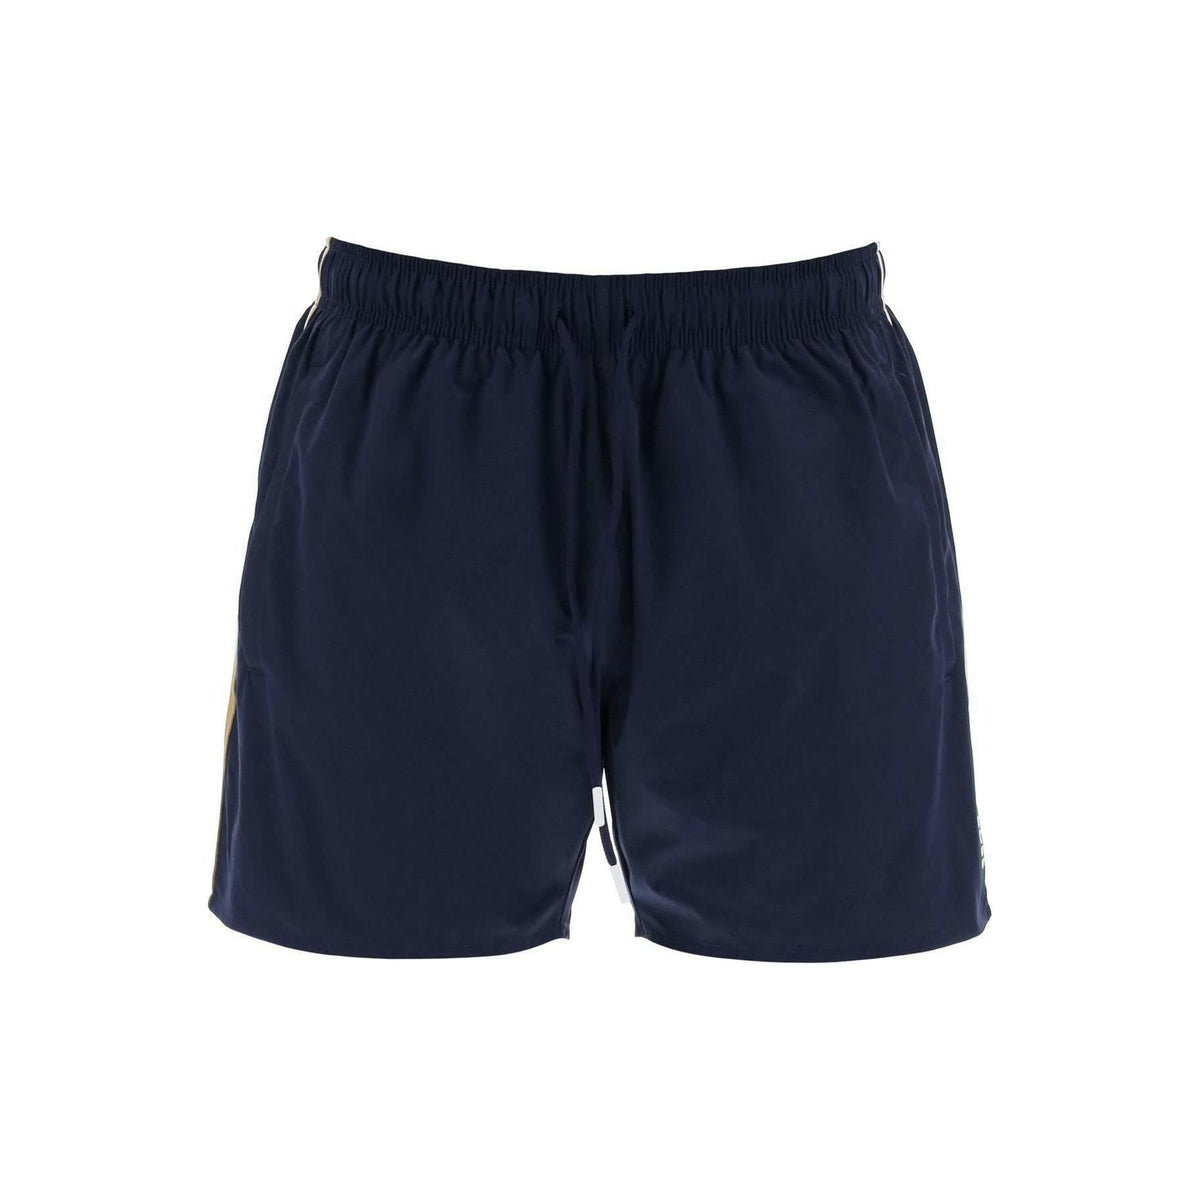 BOSS - Navy Blue Technical Fabric Swim Trunks With Tricolor Side Bands - JOHN JULIA